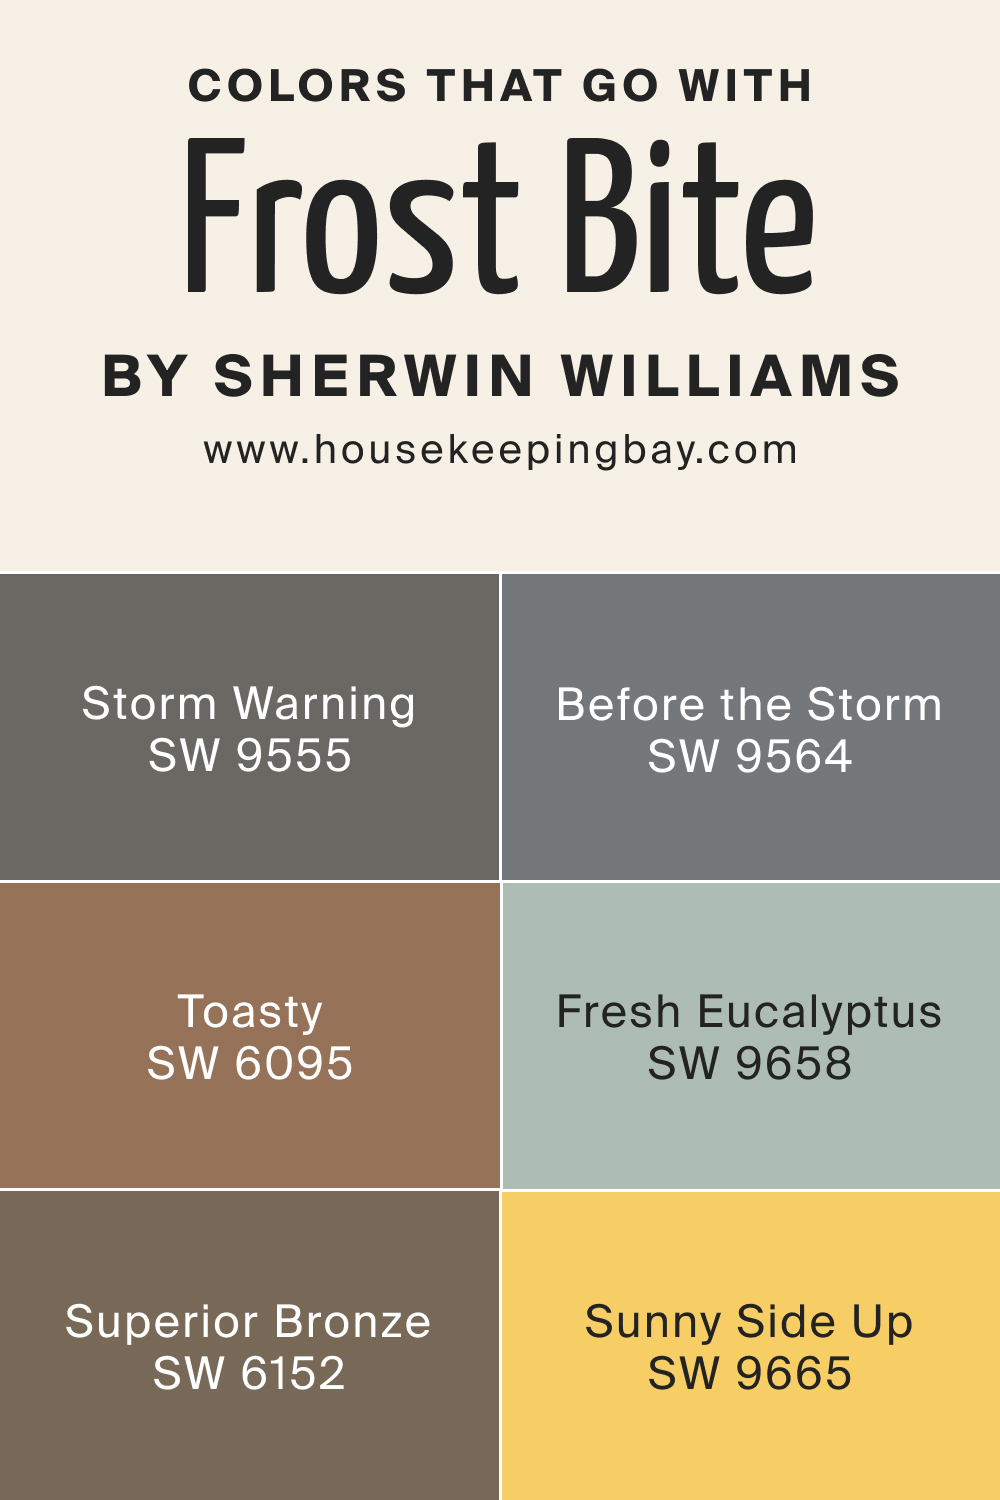 Colors that goes with SW 9505 Frost Bite by Sherwin Williams